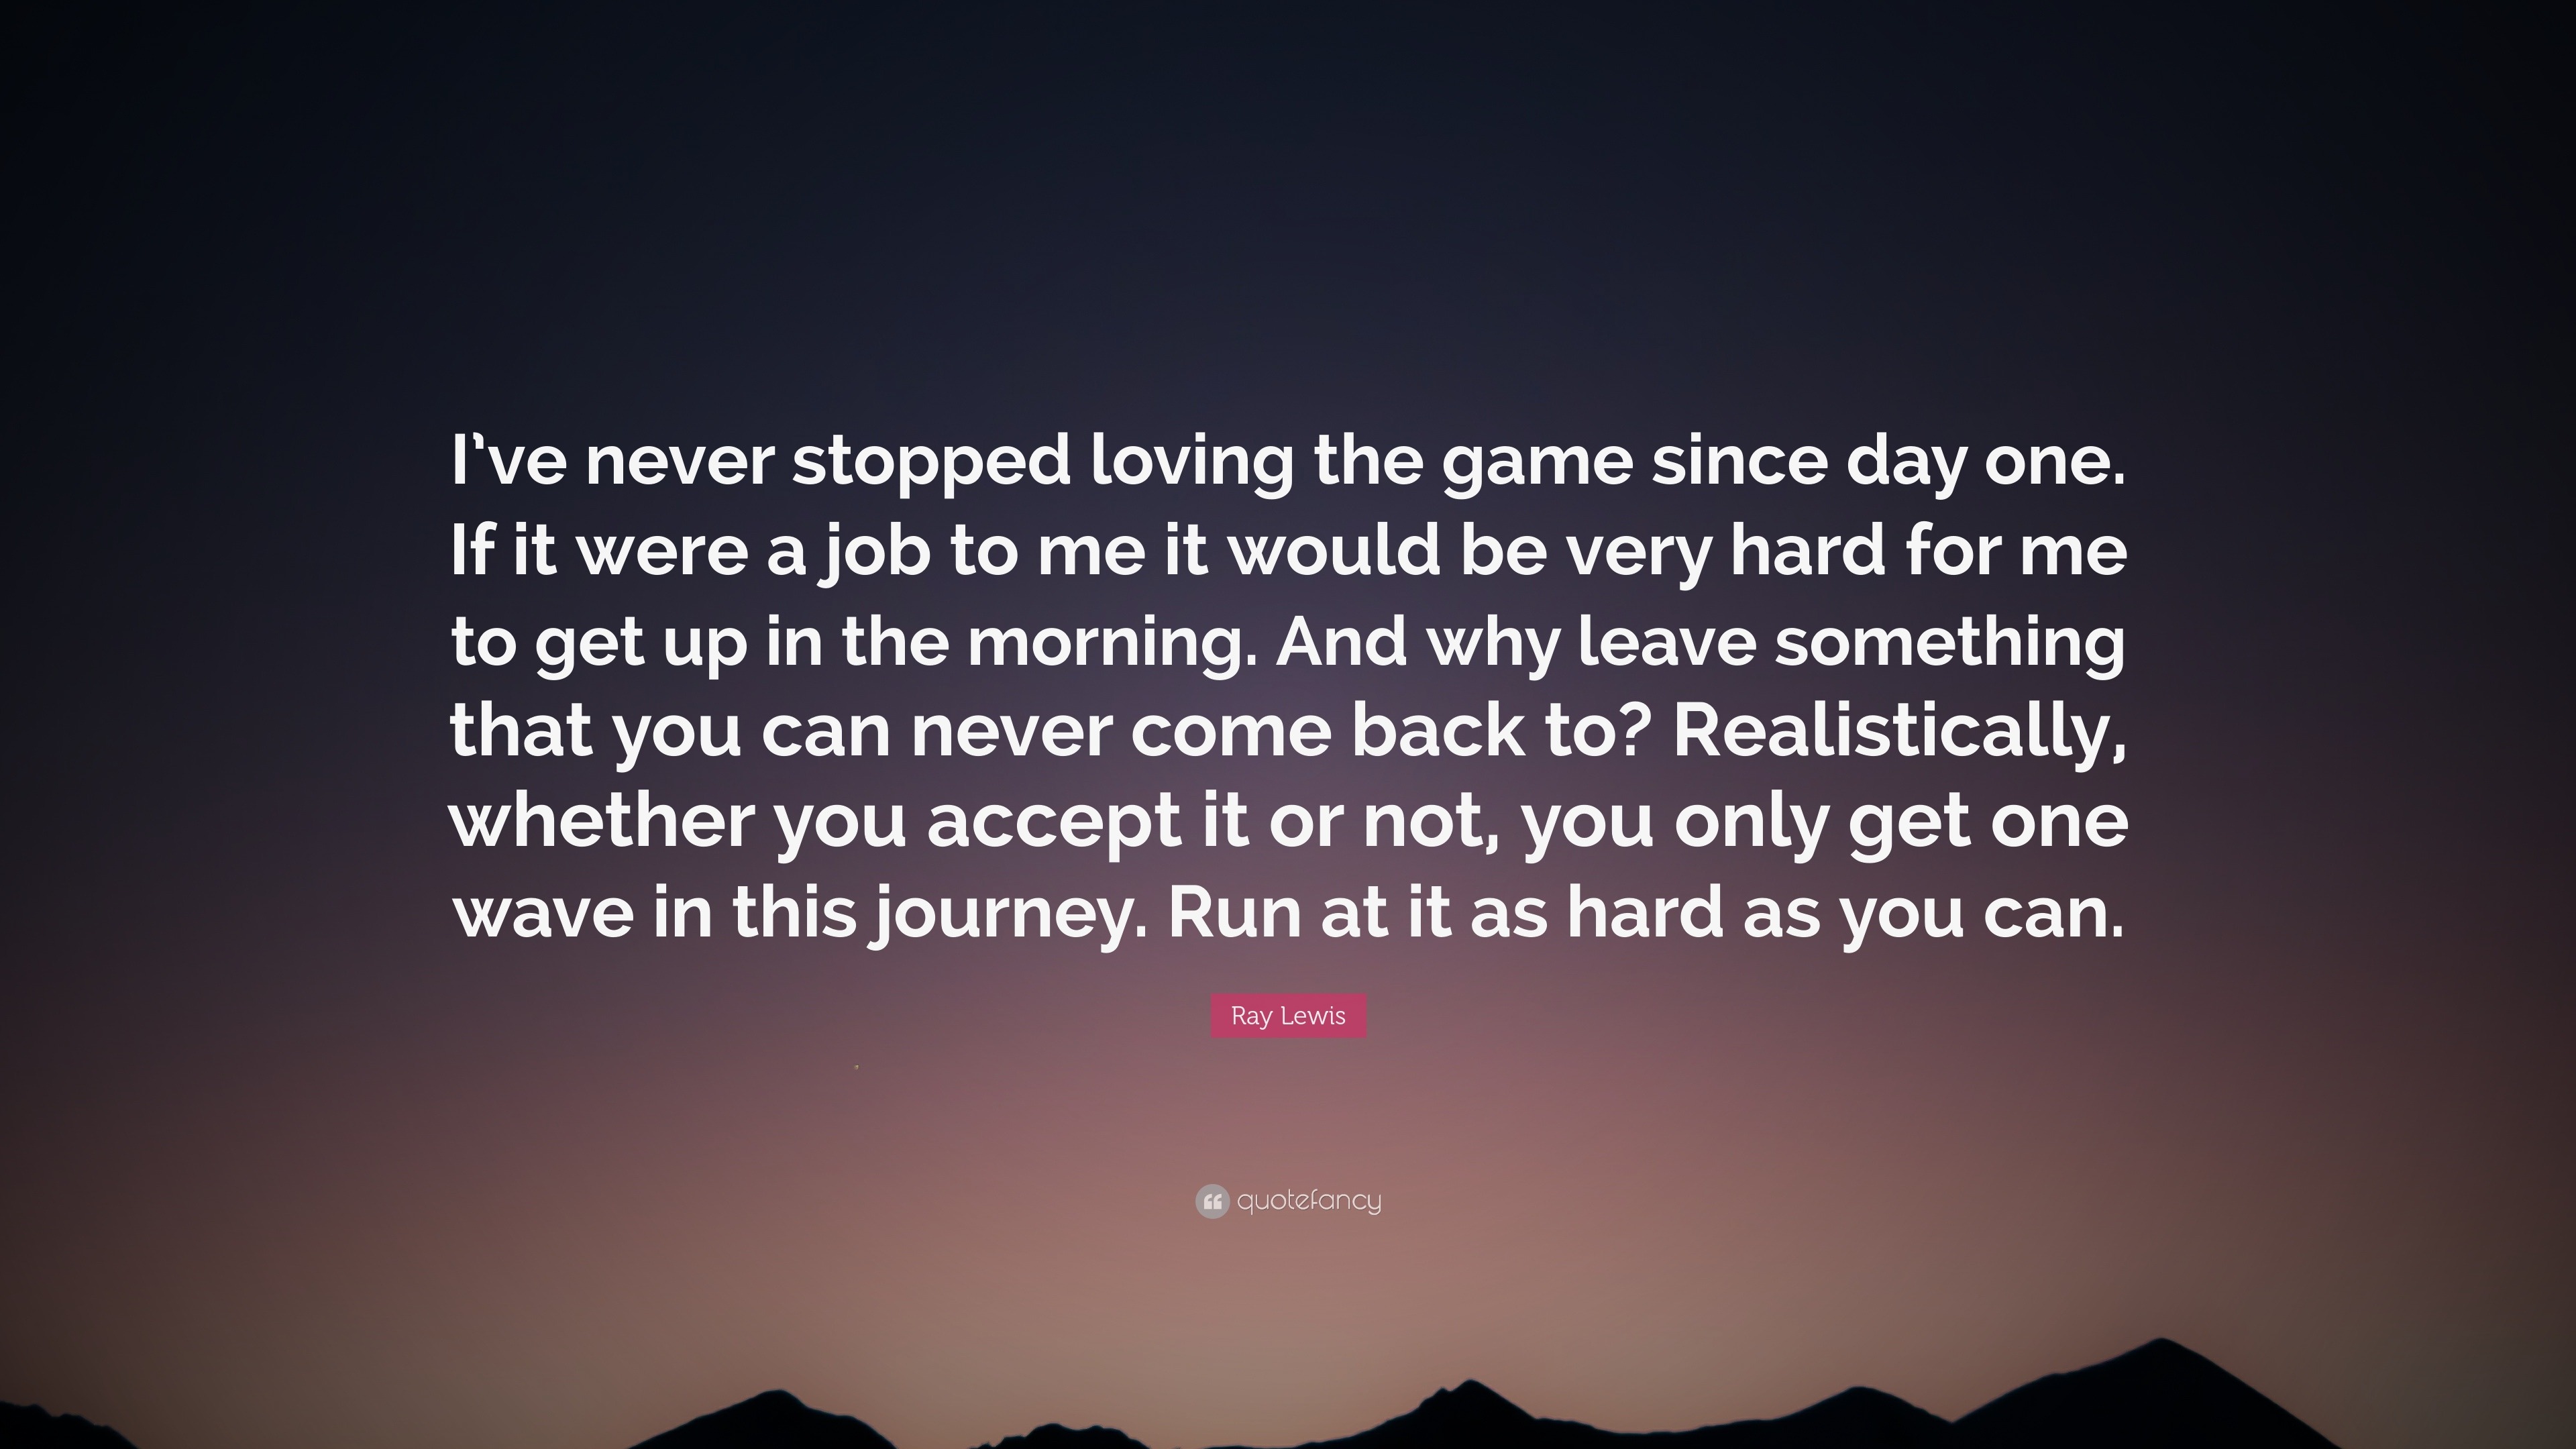 Ray Lewis Quote “I ve never stopped loving the game since day one